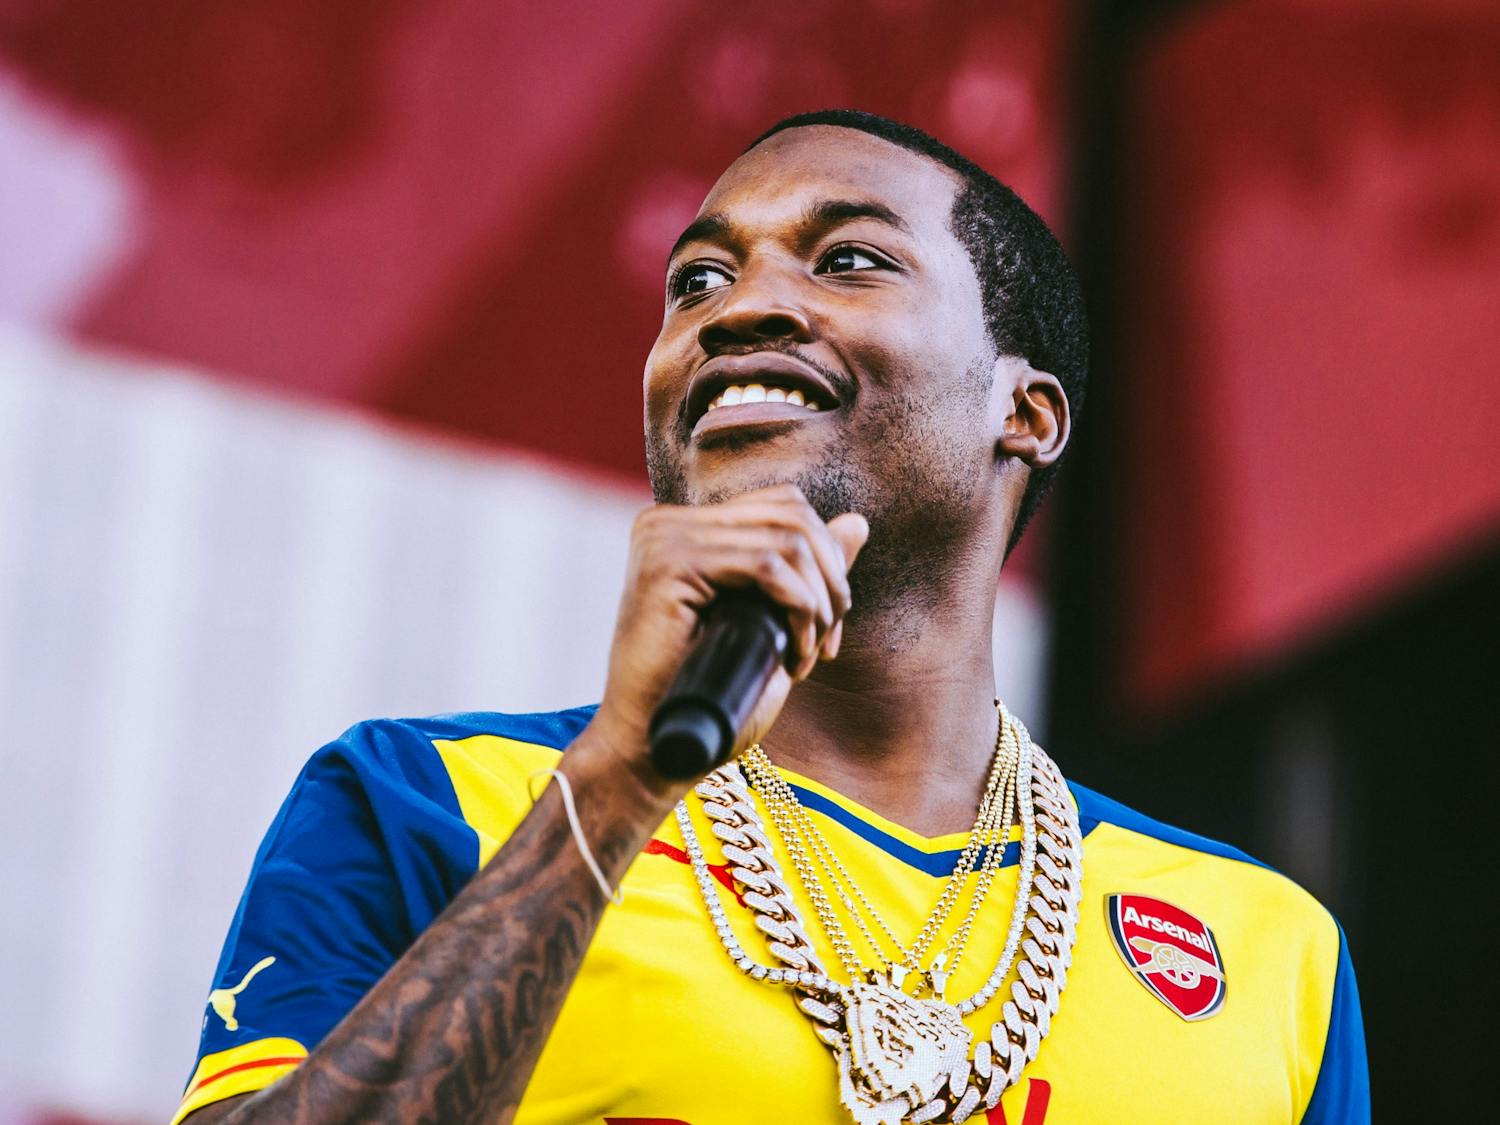 Philadelphia rapper Meek Mill delights the crowd during a 2015 concert.